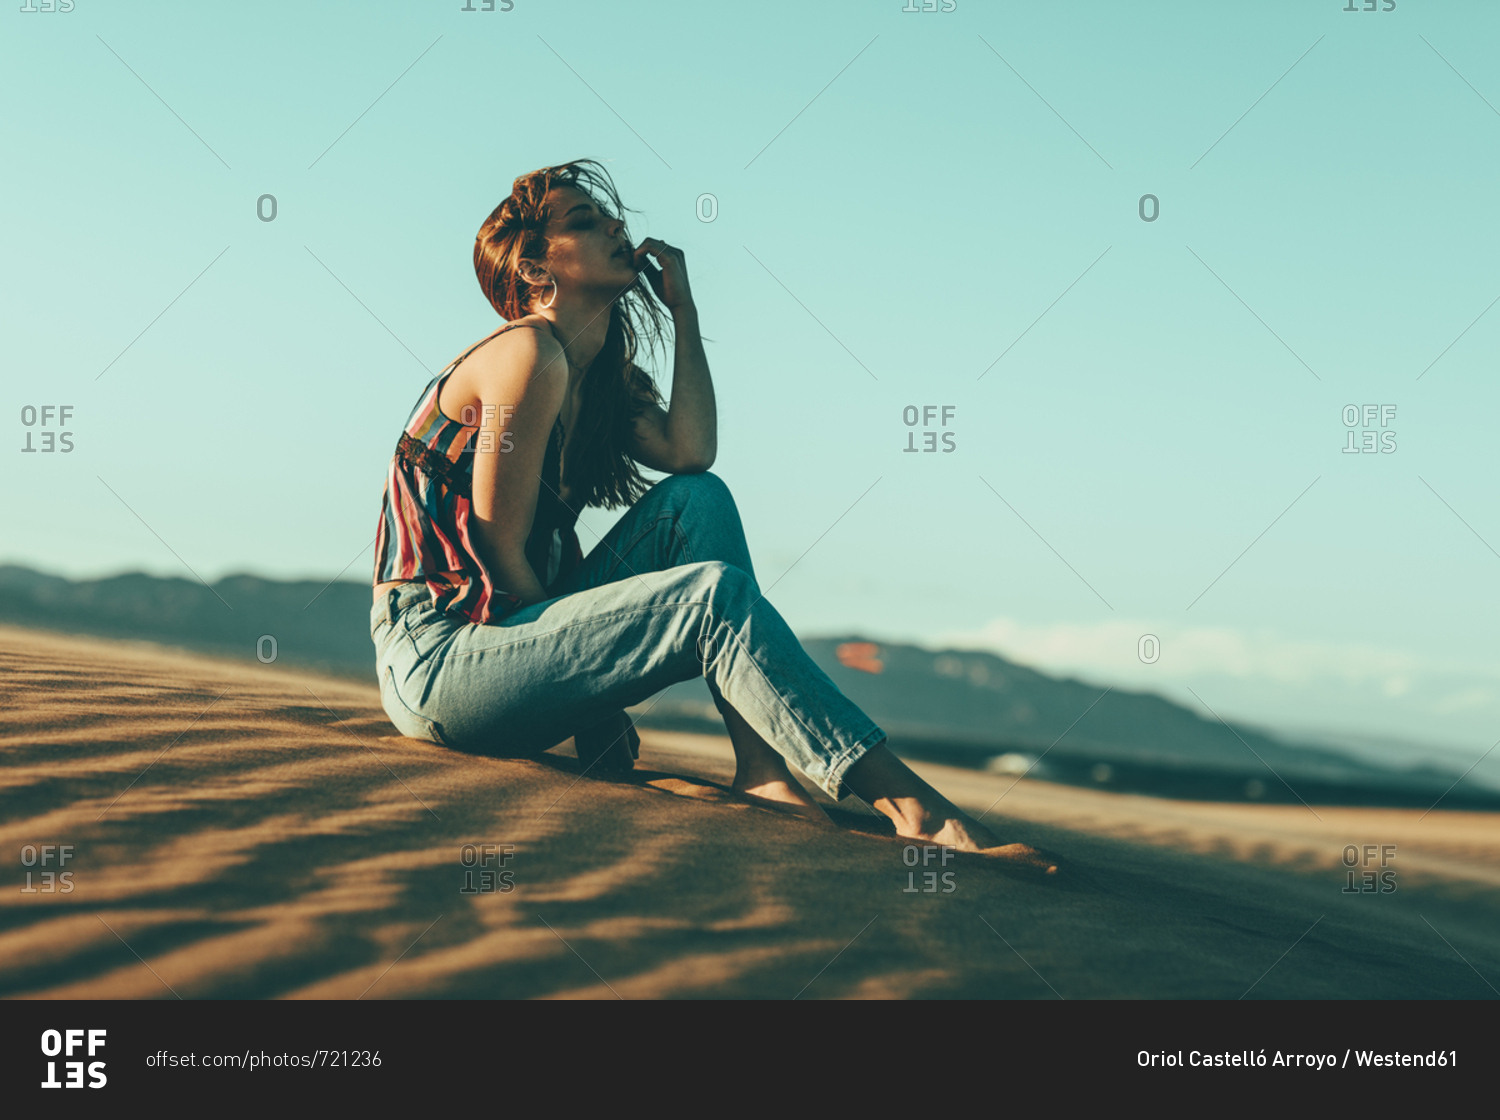 Young woman sitting in desert landscape